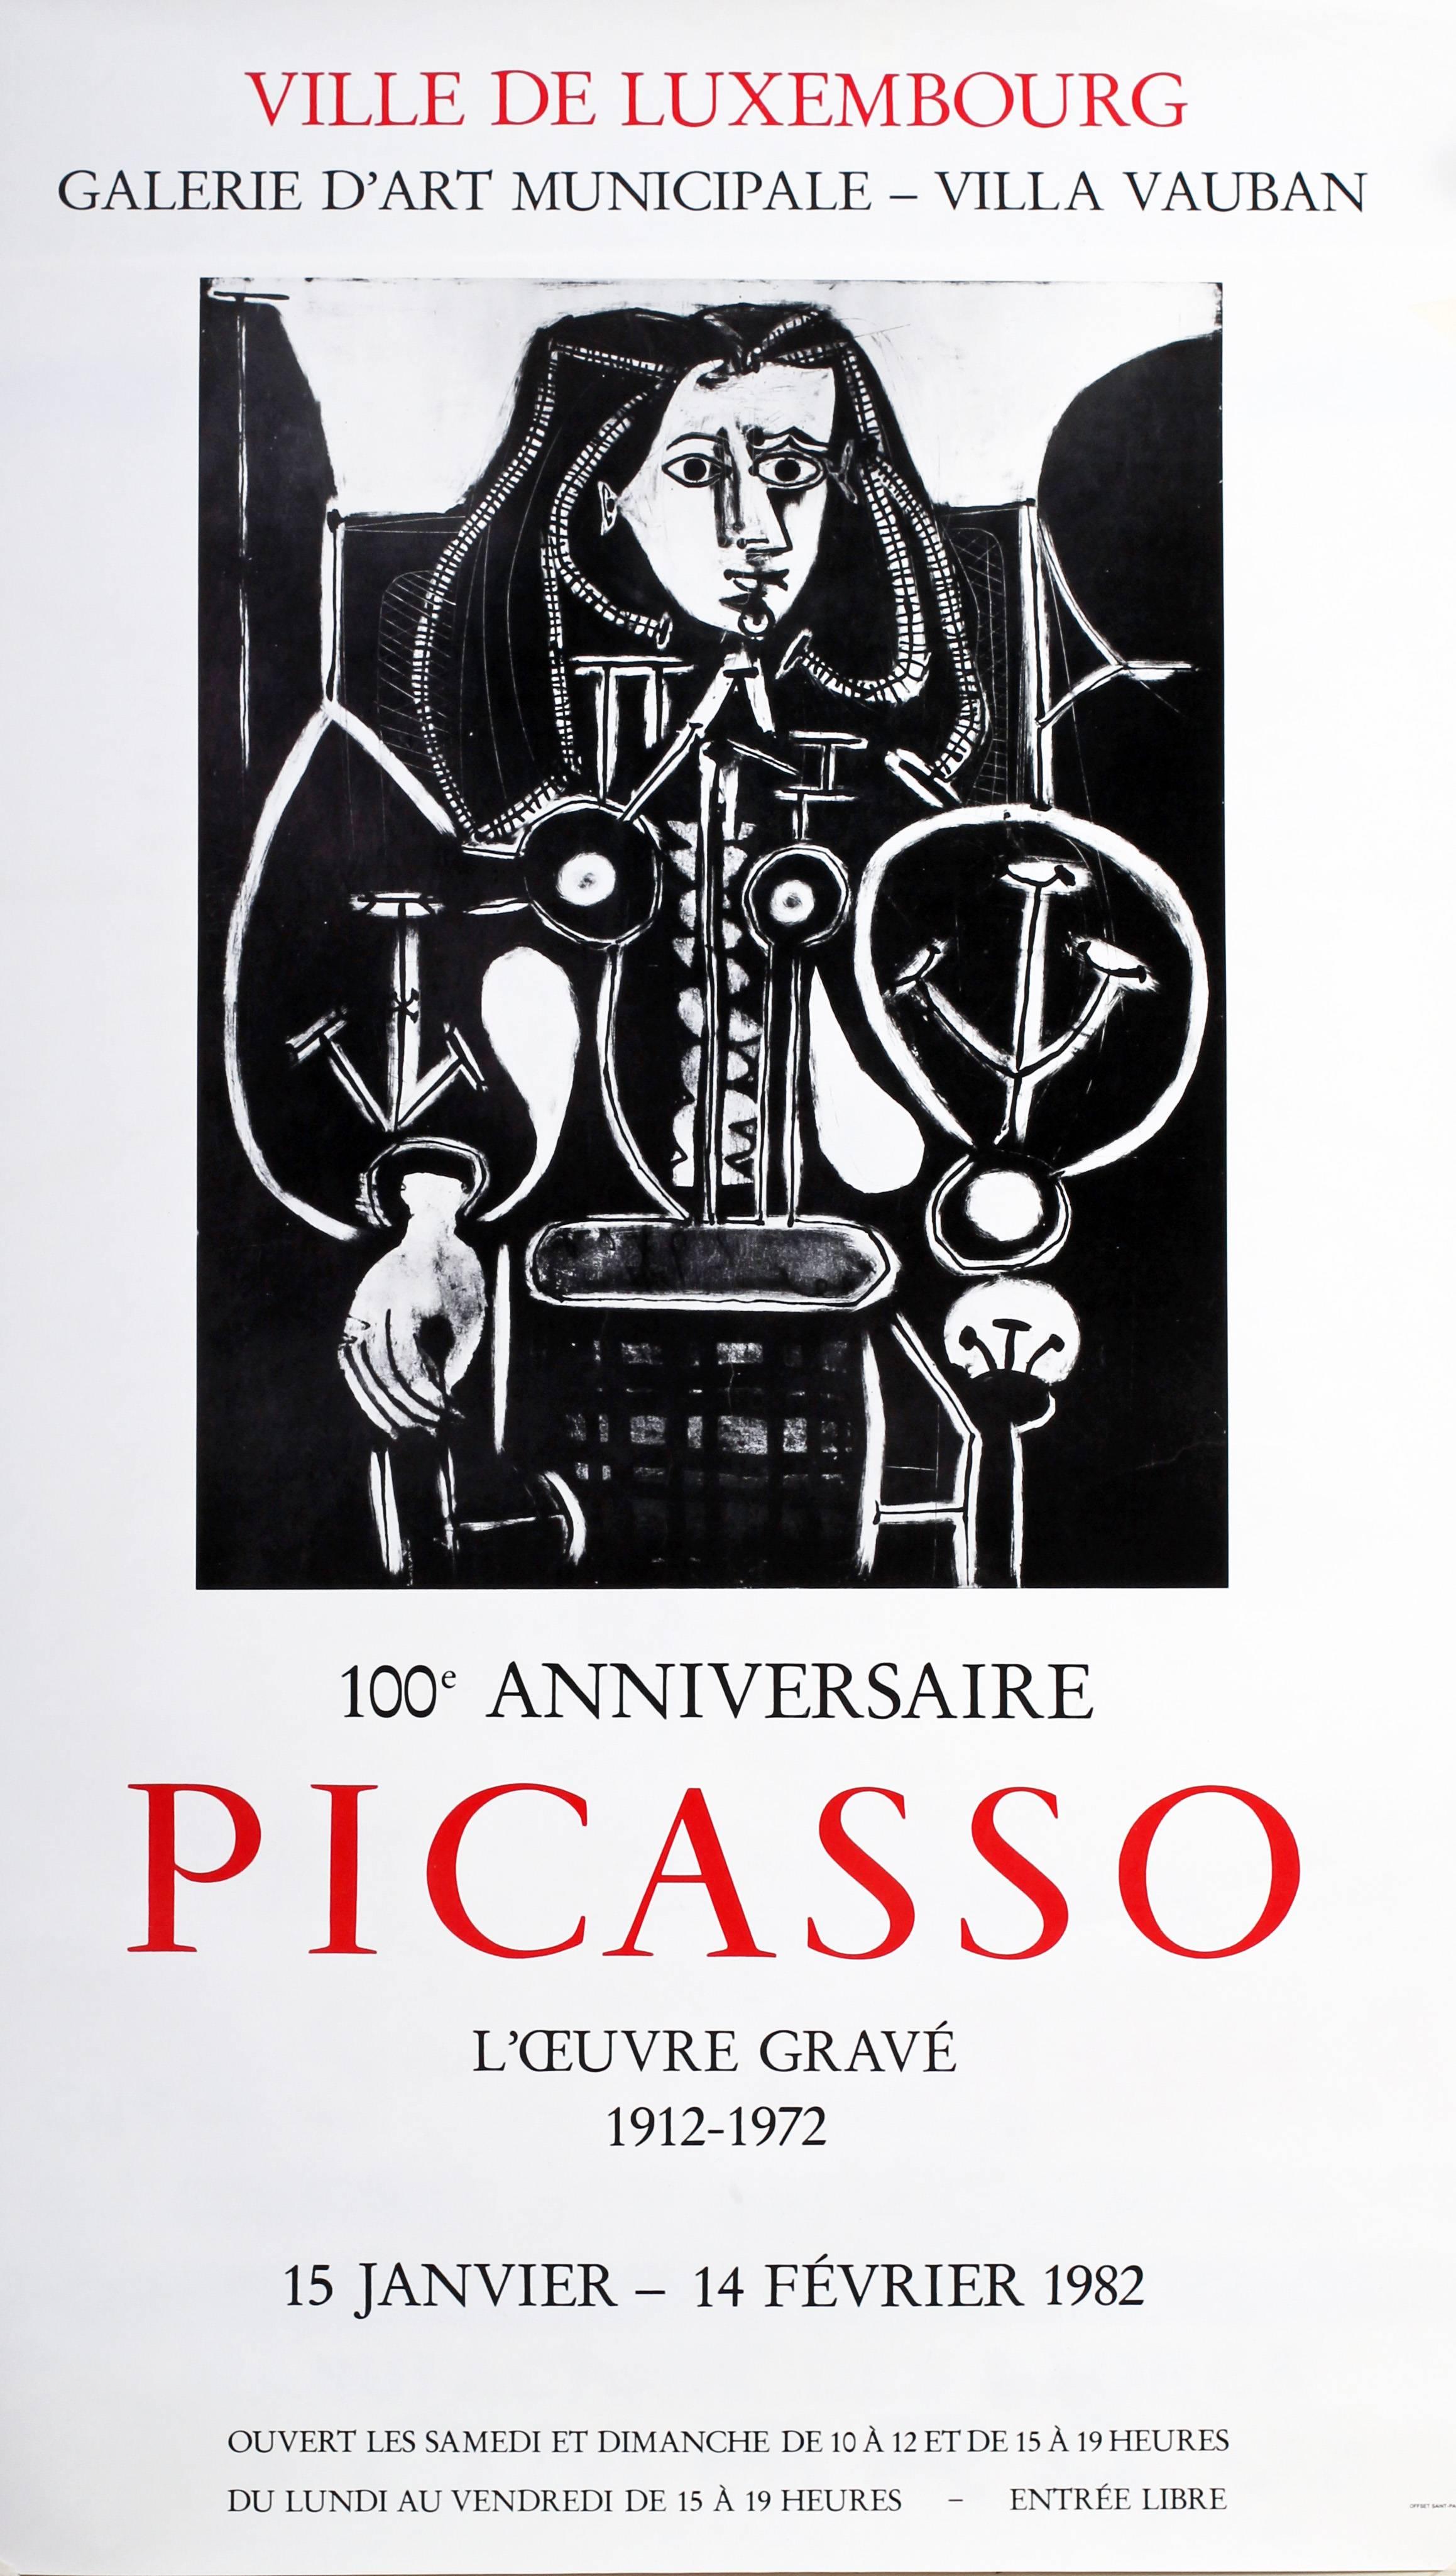 Unknown Abstract Print - Picasso exhibiton poster for Ville de Luxembourg, Galerie d’art municipal 